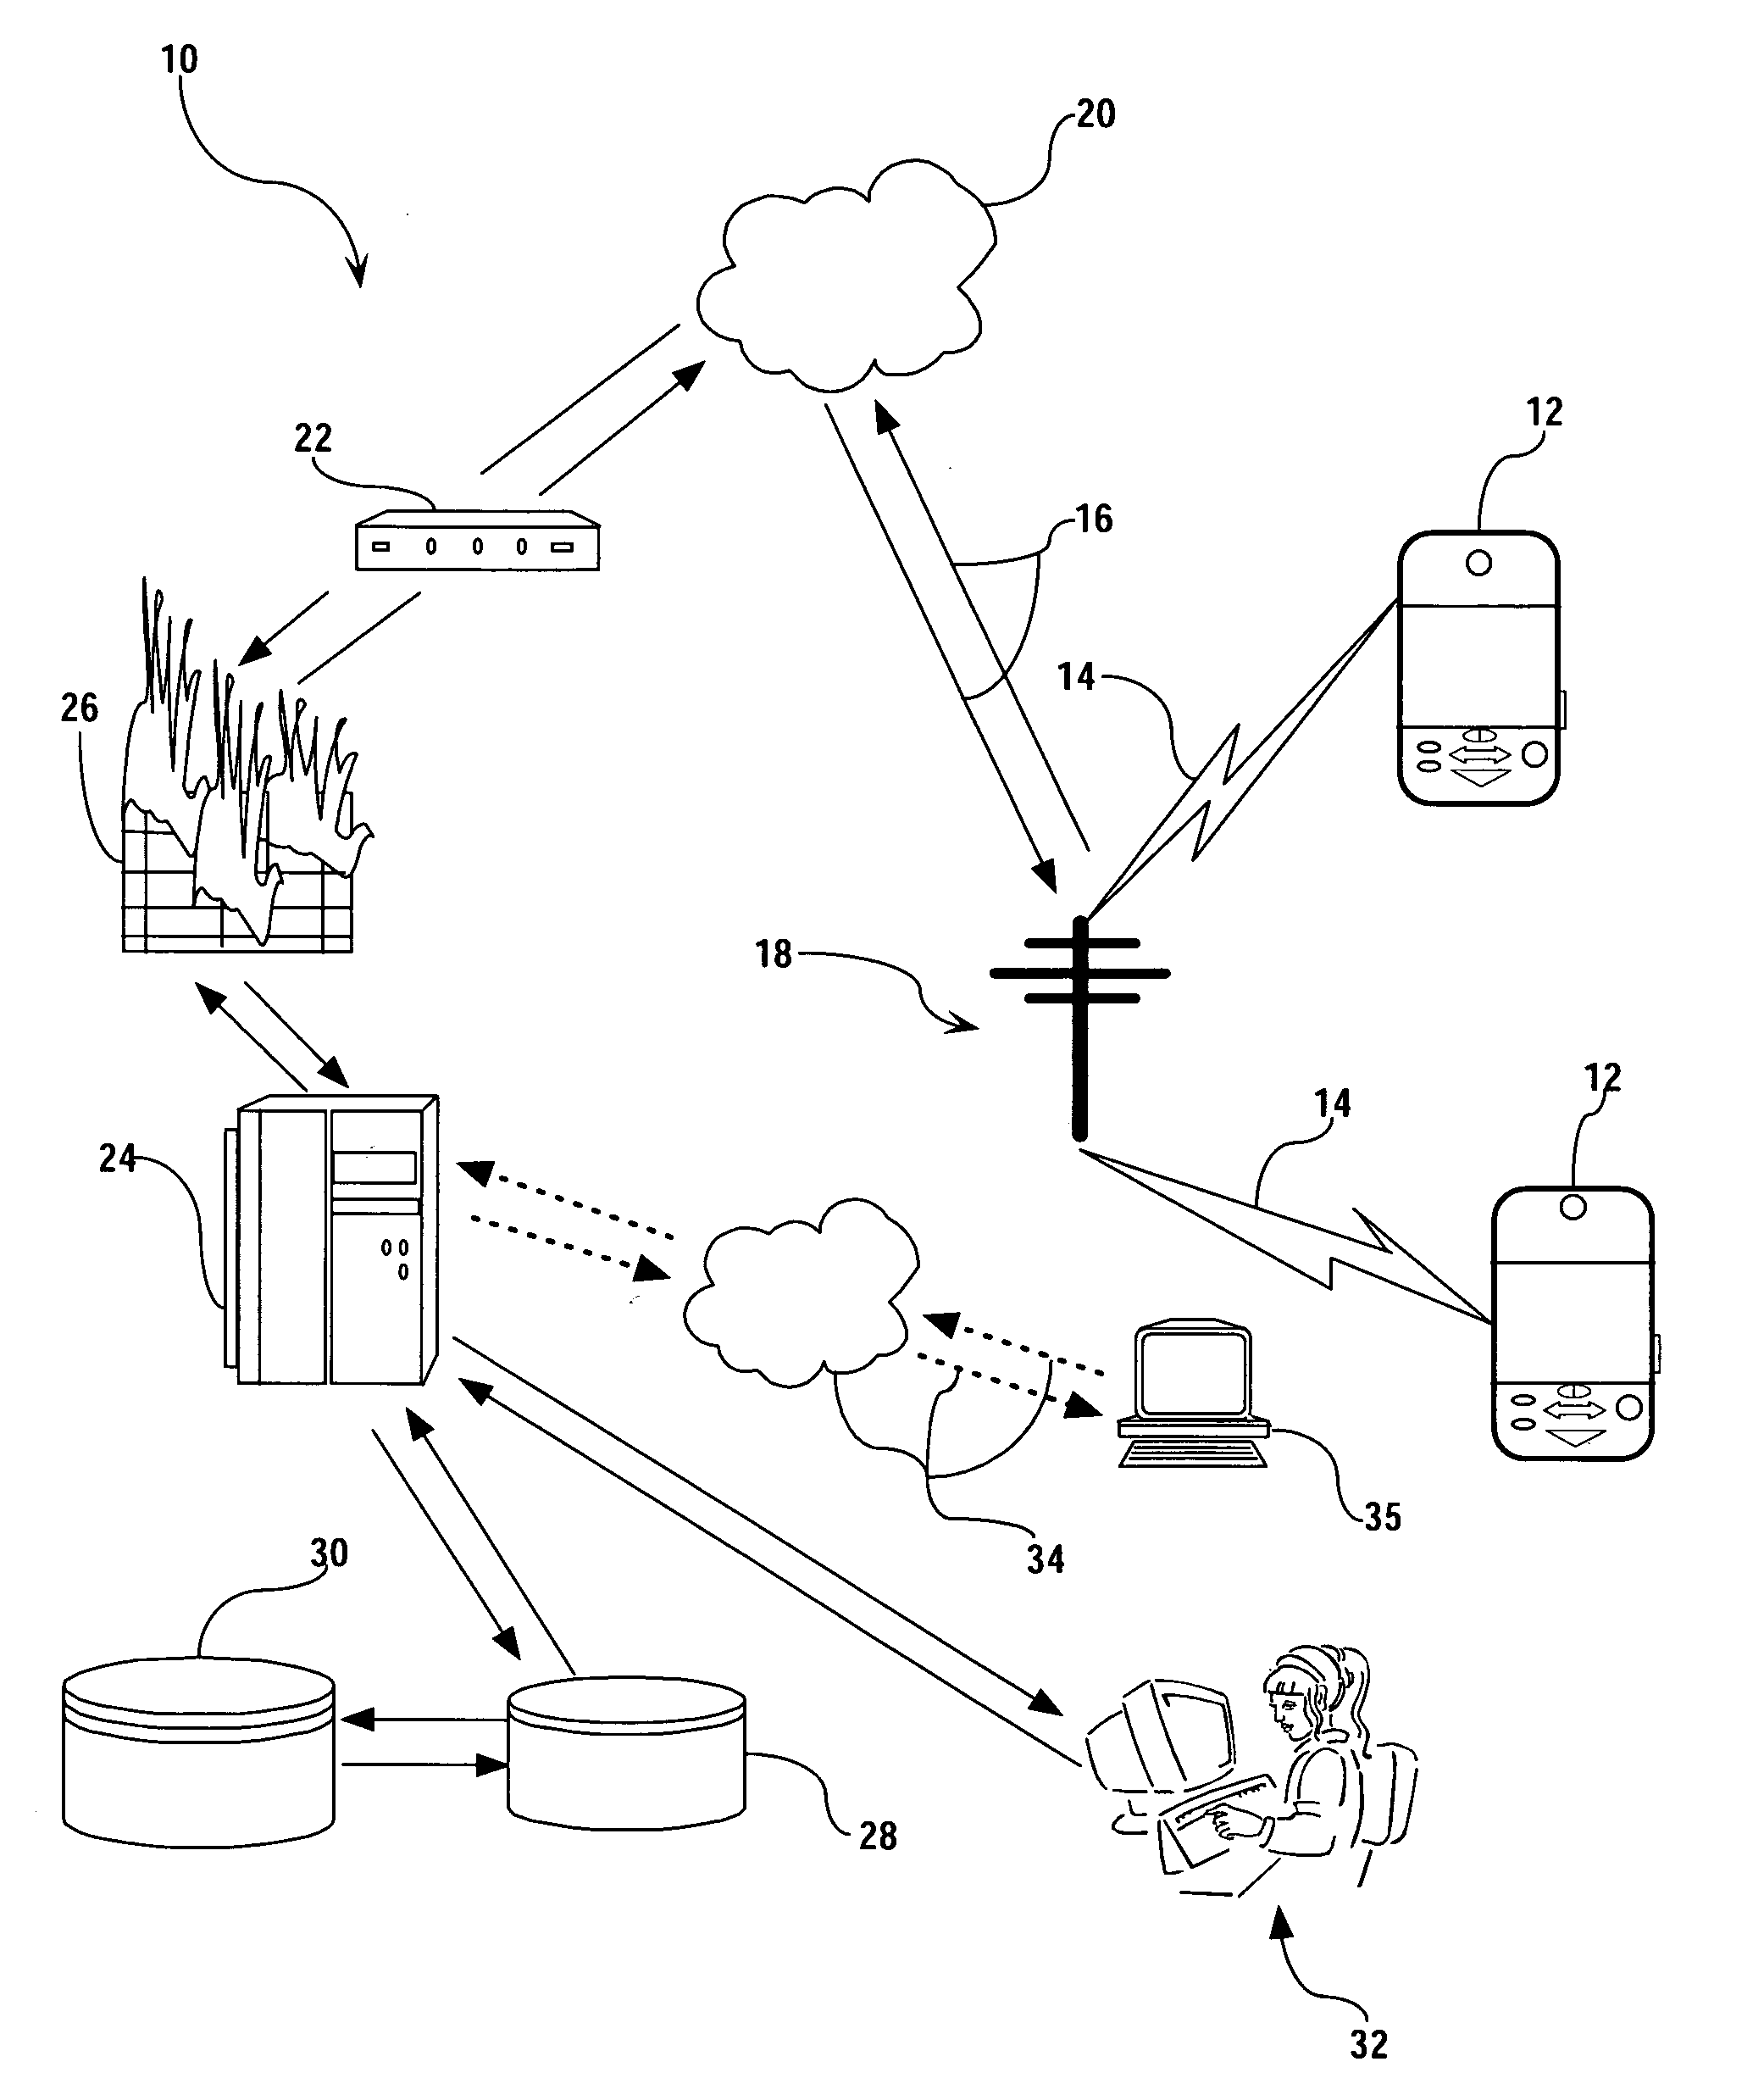 System and method for electronically recording task-specific and location-specific information, including farm-related information